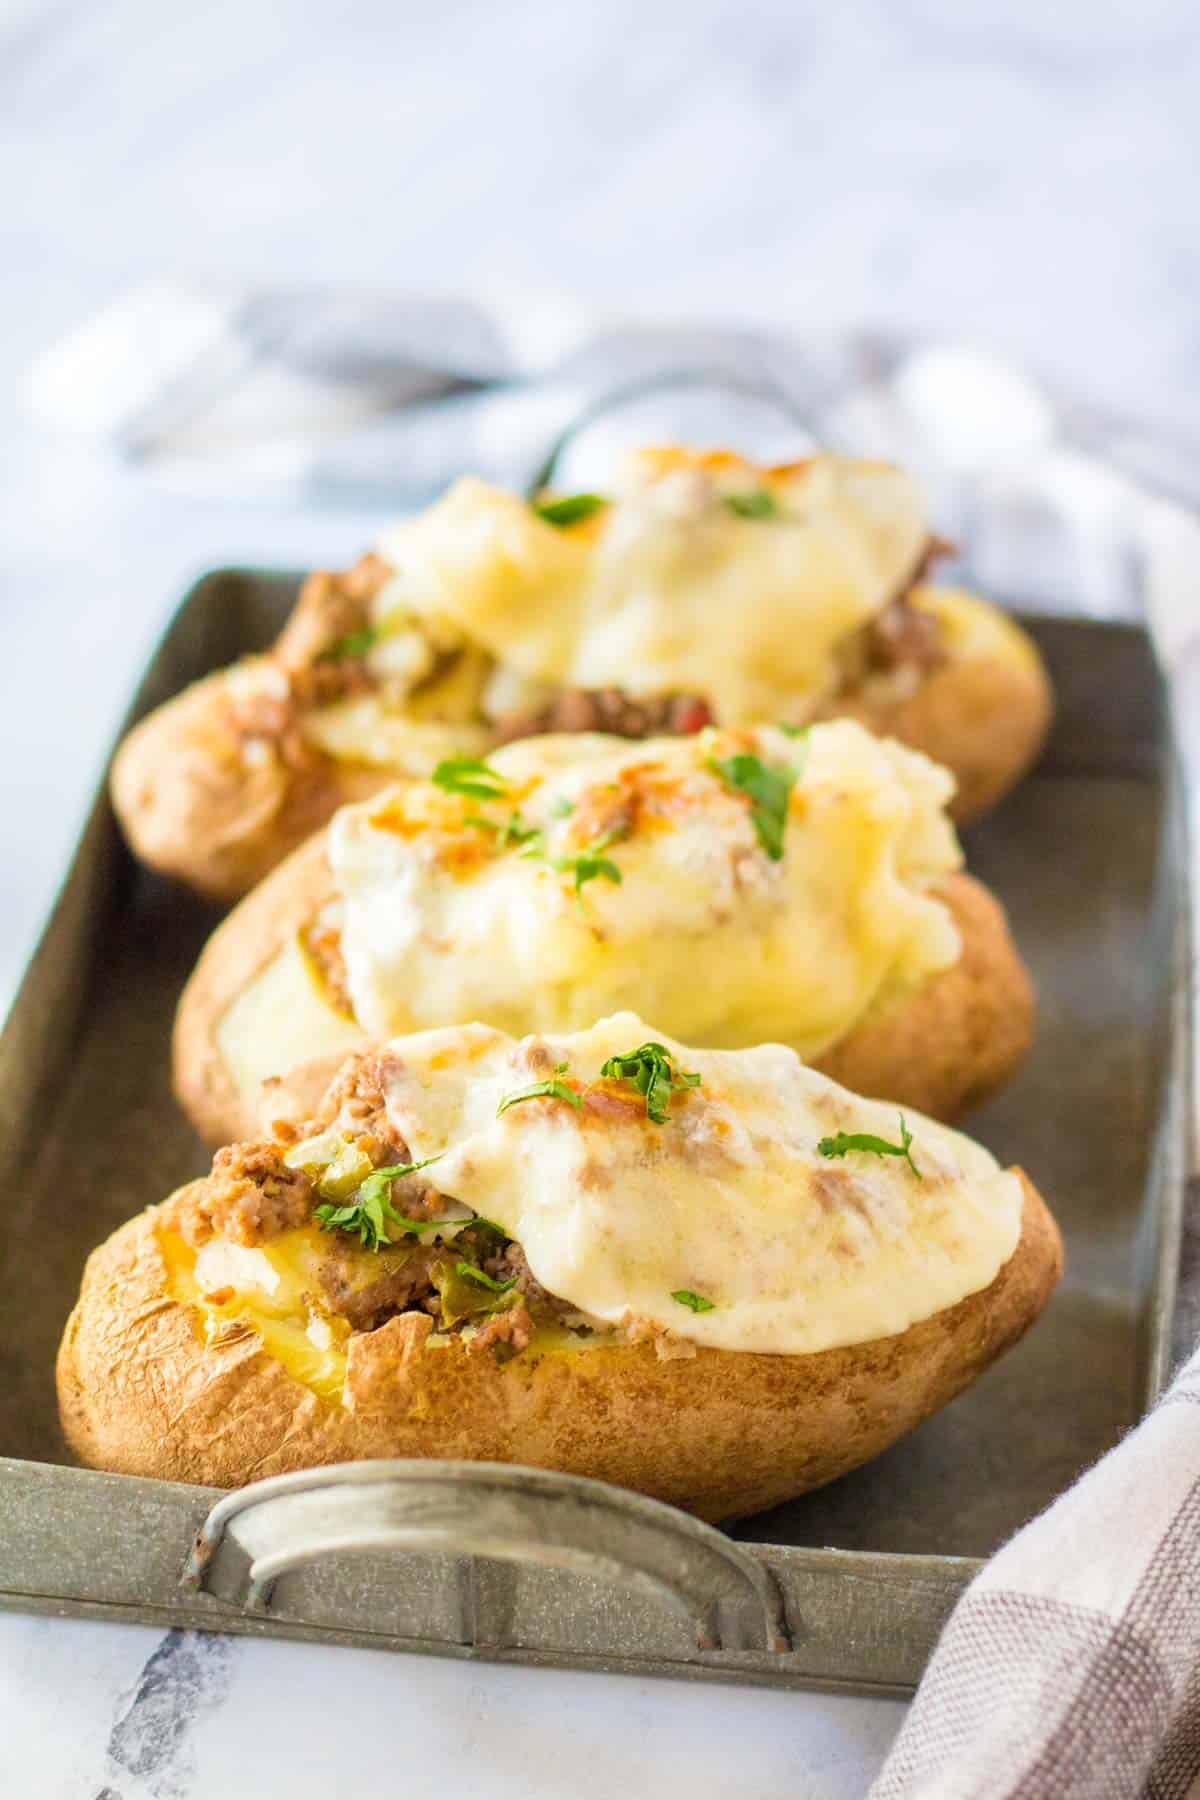 Three baked stuffed potatoes on a metal serving tray.